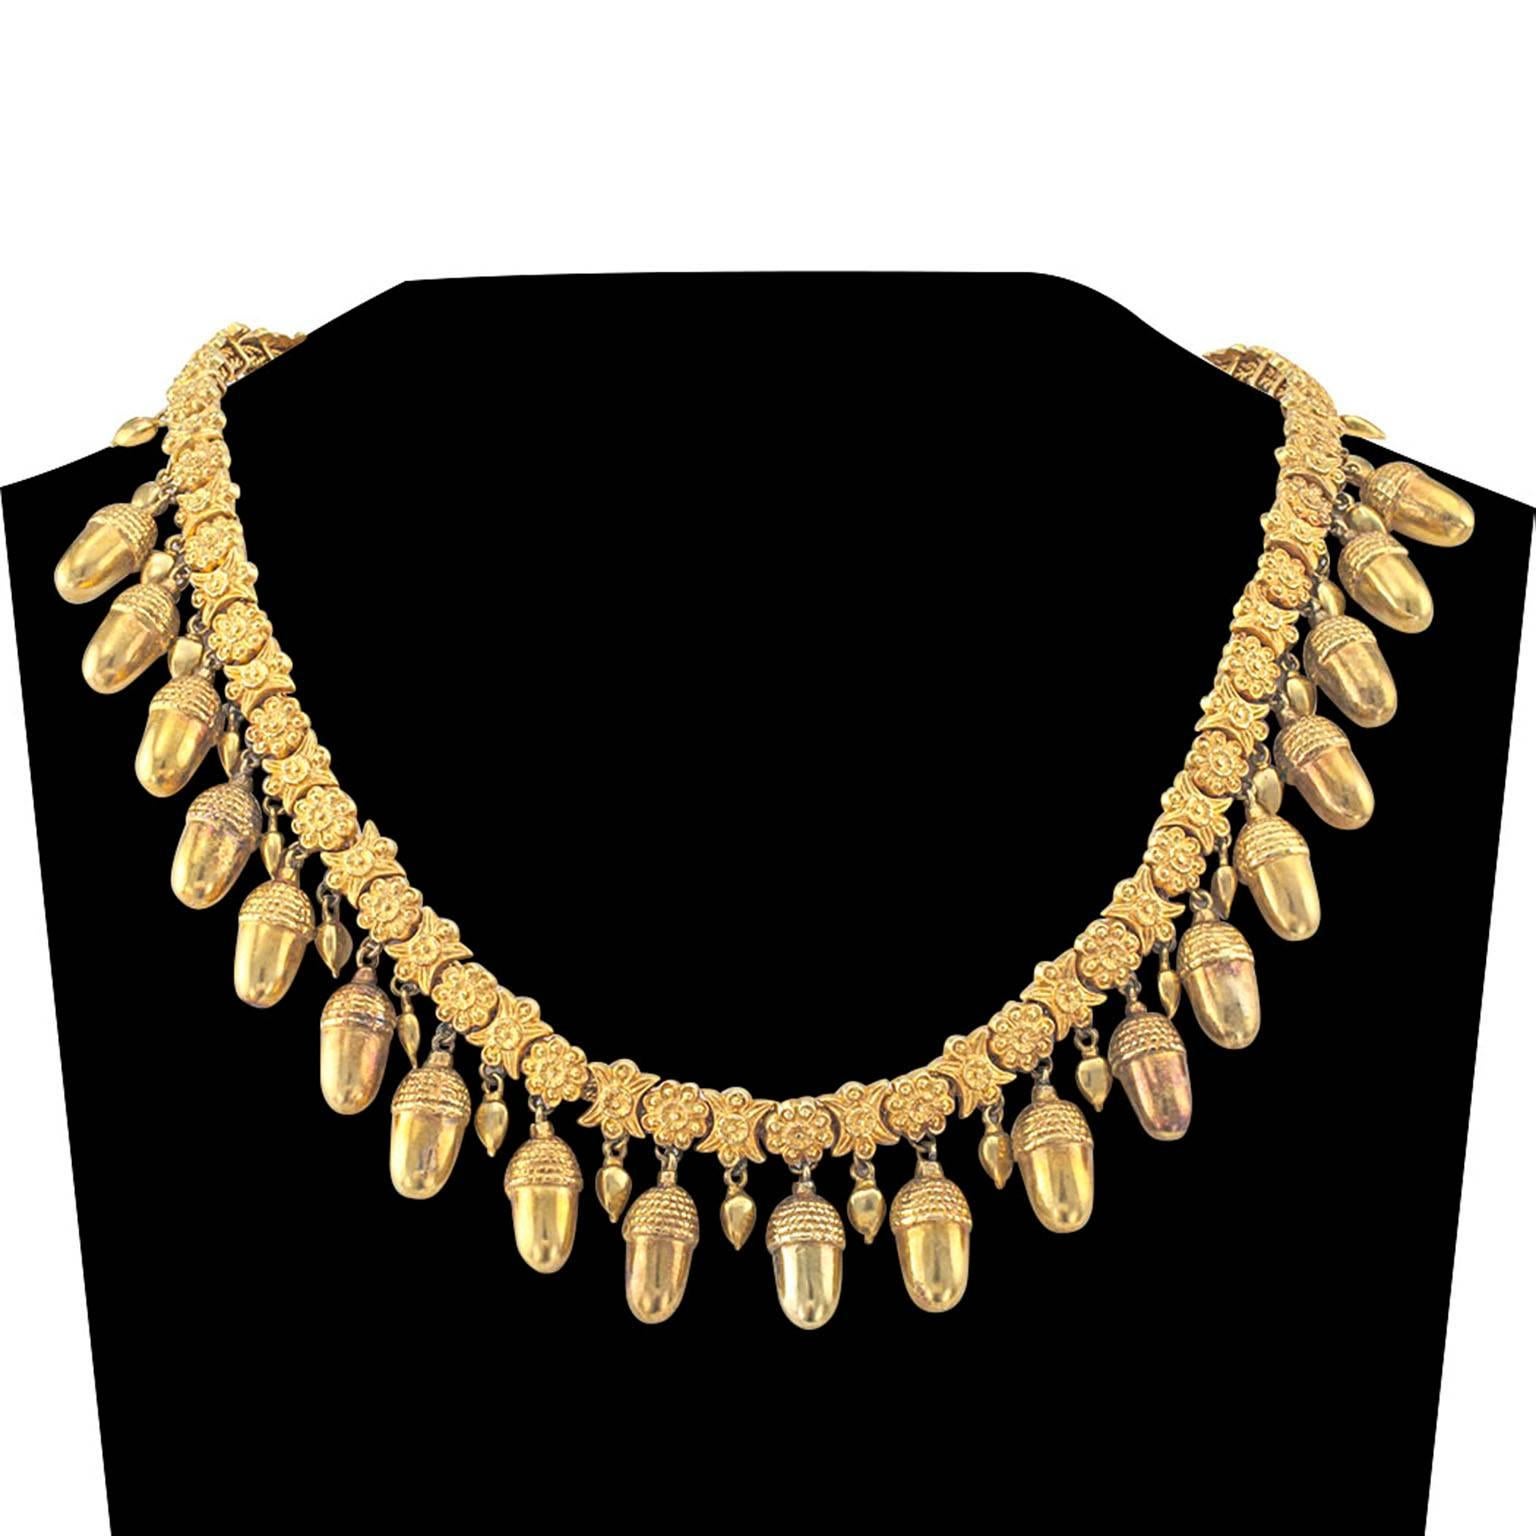 Antique Gold Acorn Necklace

Victorians were very fond of acorns, associating them with longevity and wealth and prosperity. In that respect, this necklace could not be more loaded with symbolism.  The acorn garland encircles the totality of the